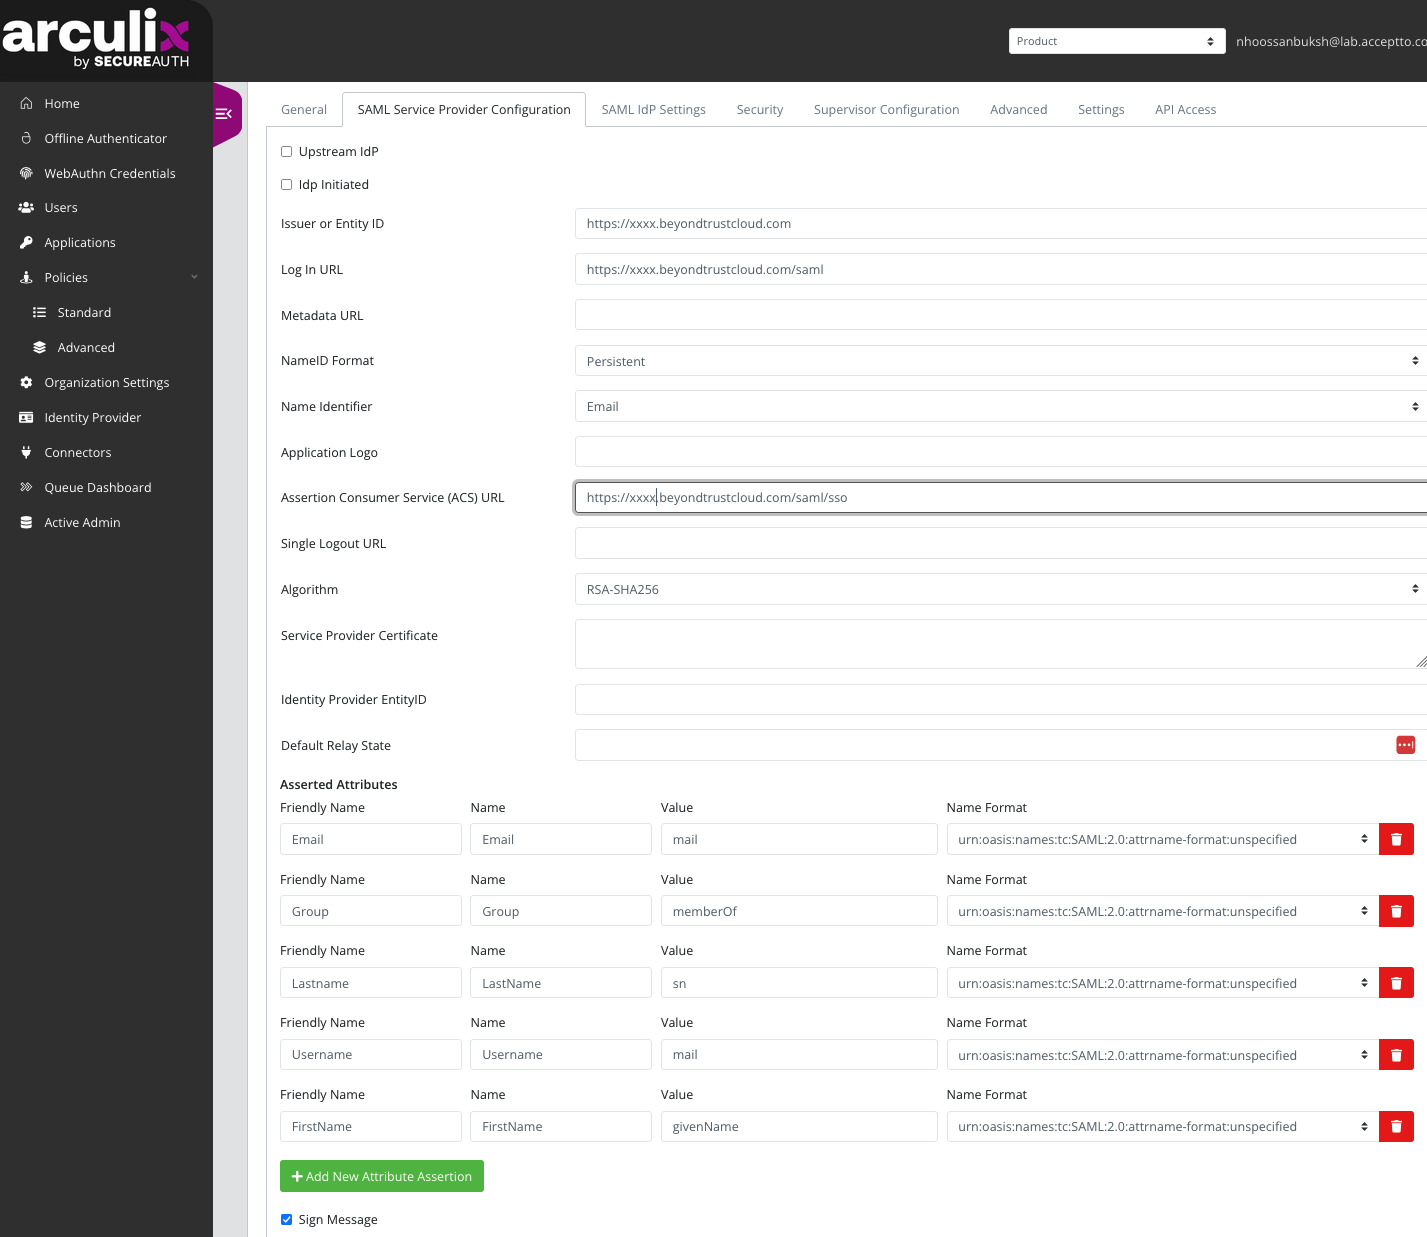 Complete SAML details from Remote Support in Arculix.